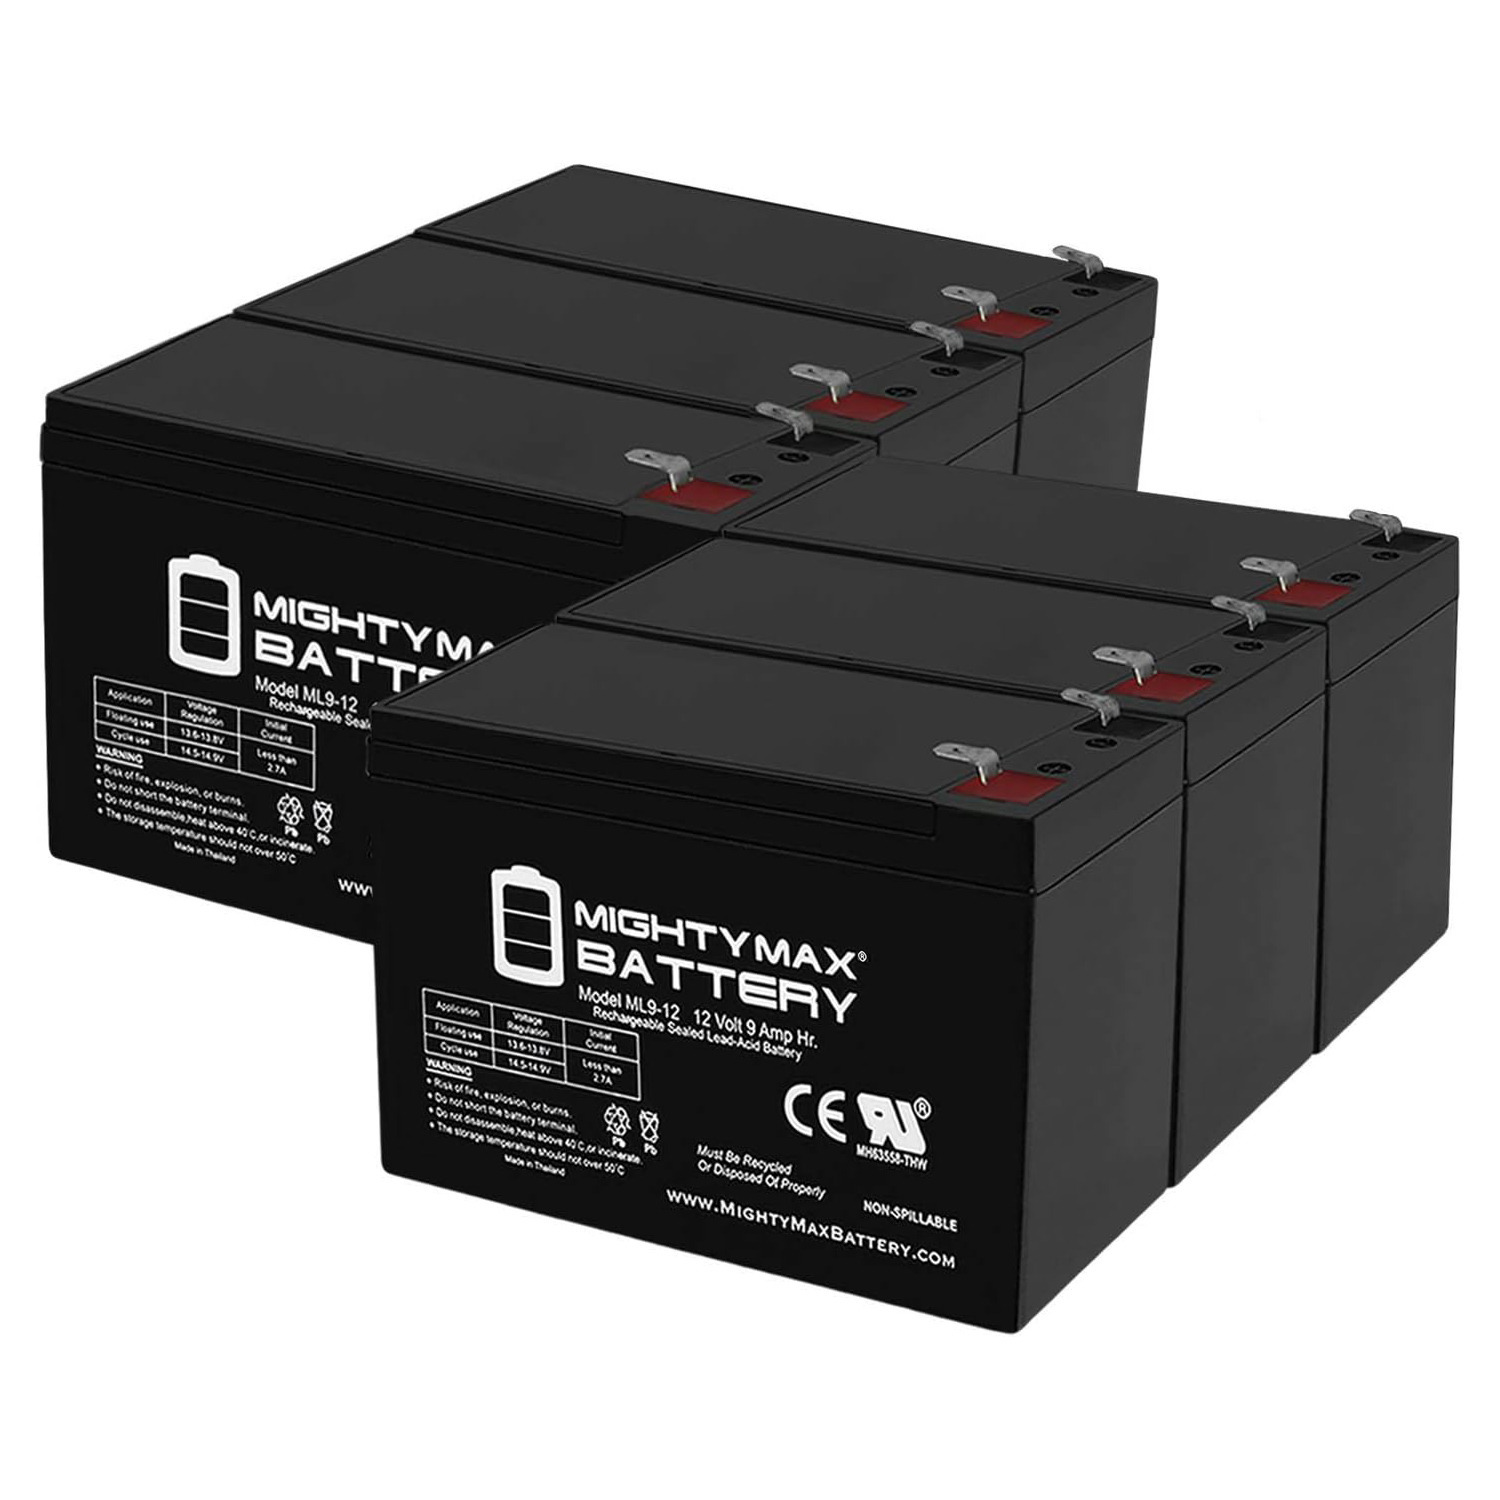 Altronix SMP7PMCTXPD16 12V, 9Ah Lead Acid Battery - 6 Pack